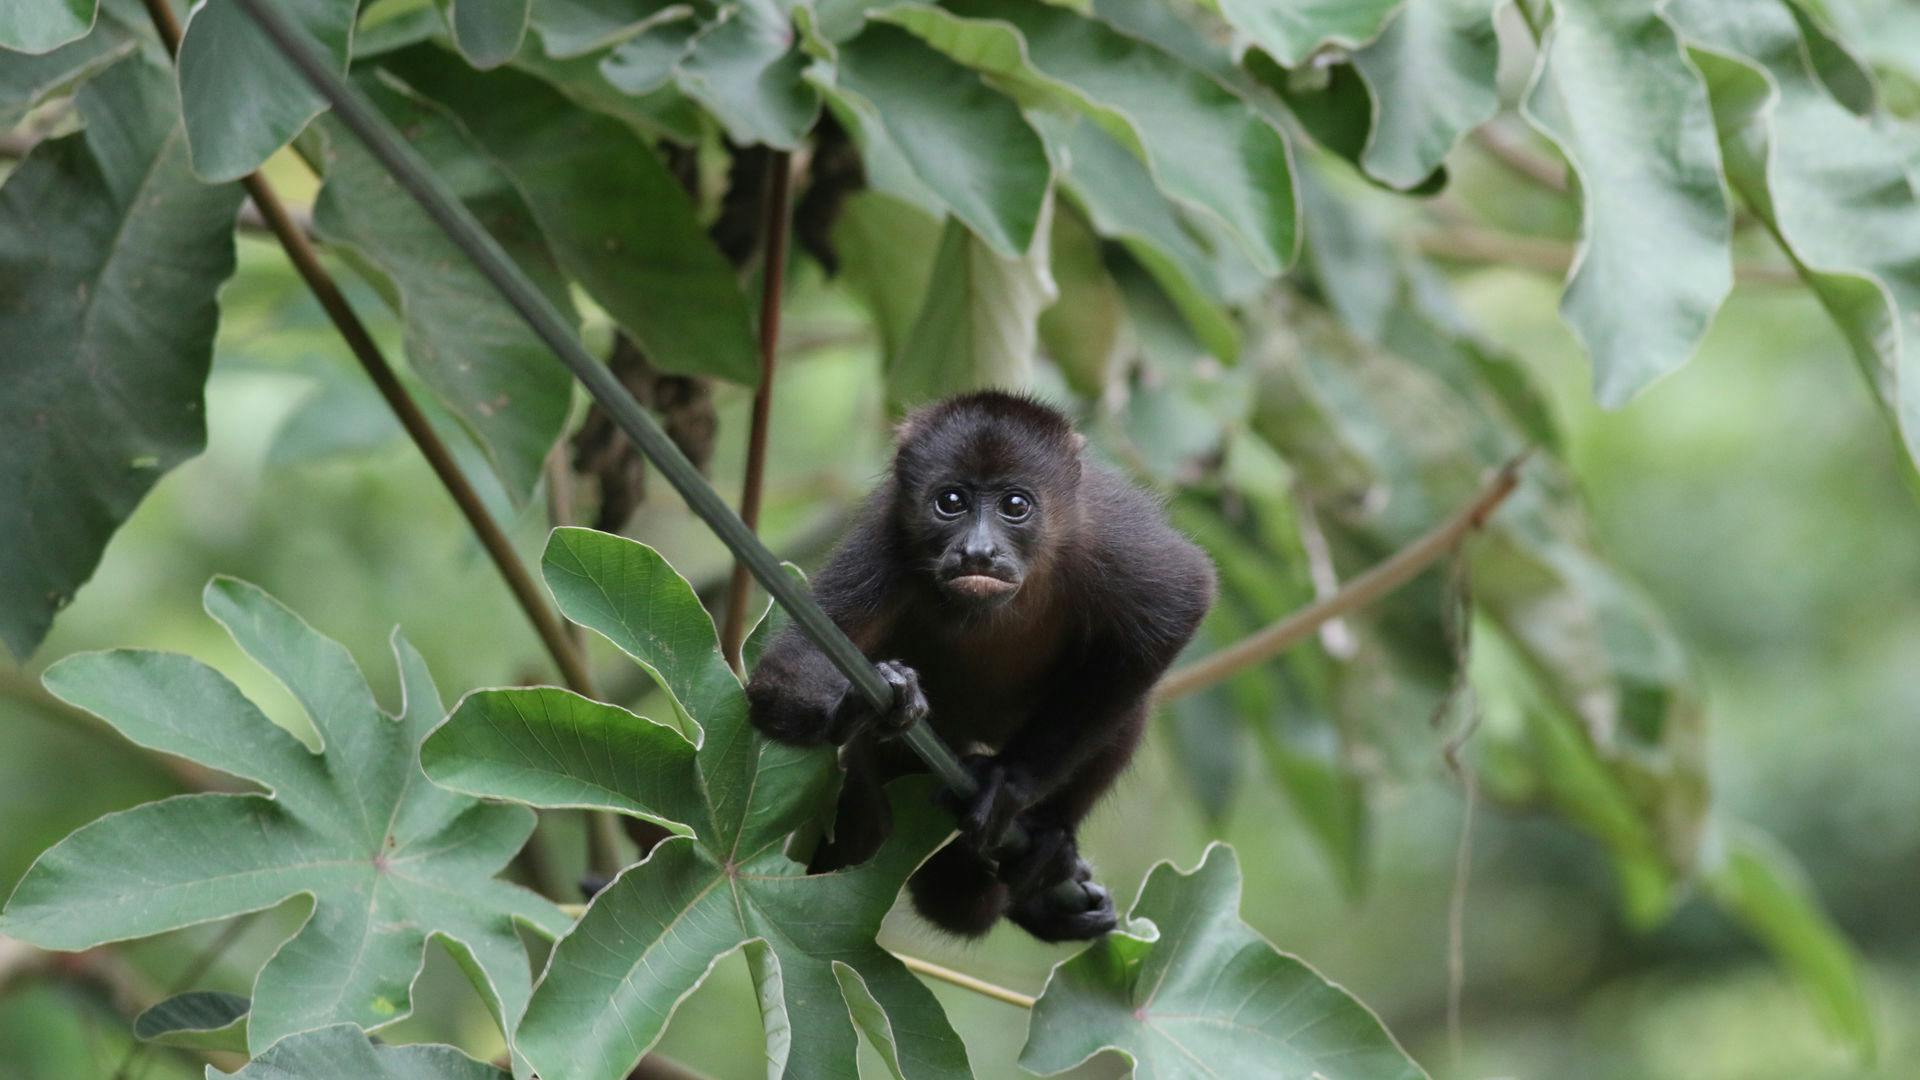 A small black monkey with a jungle background